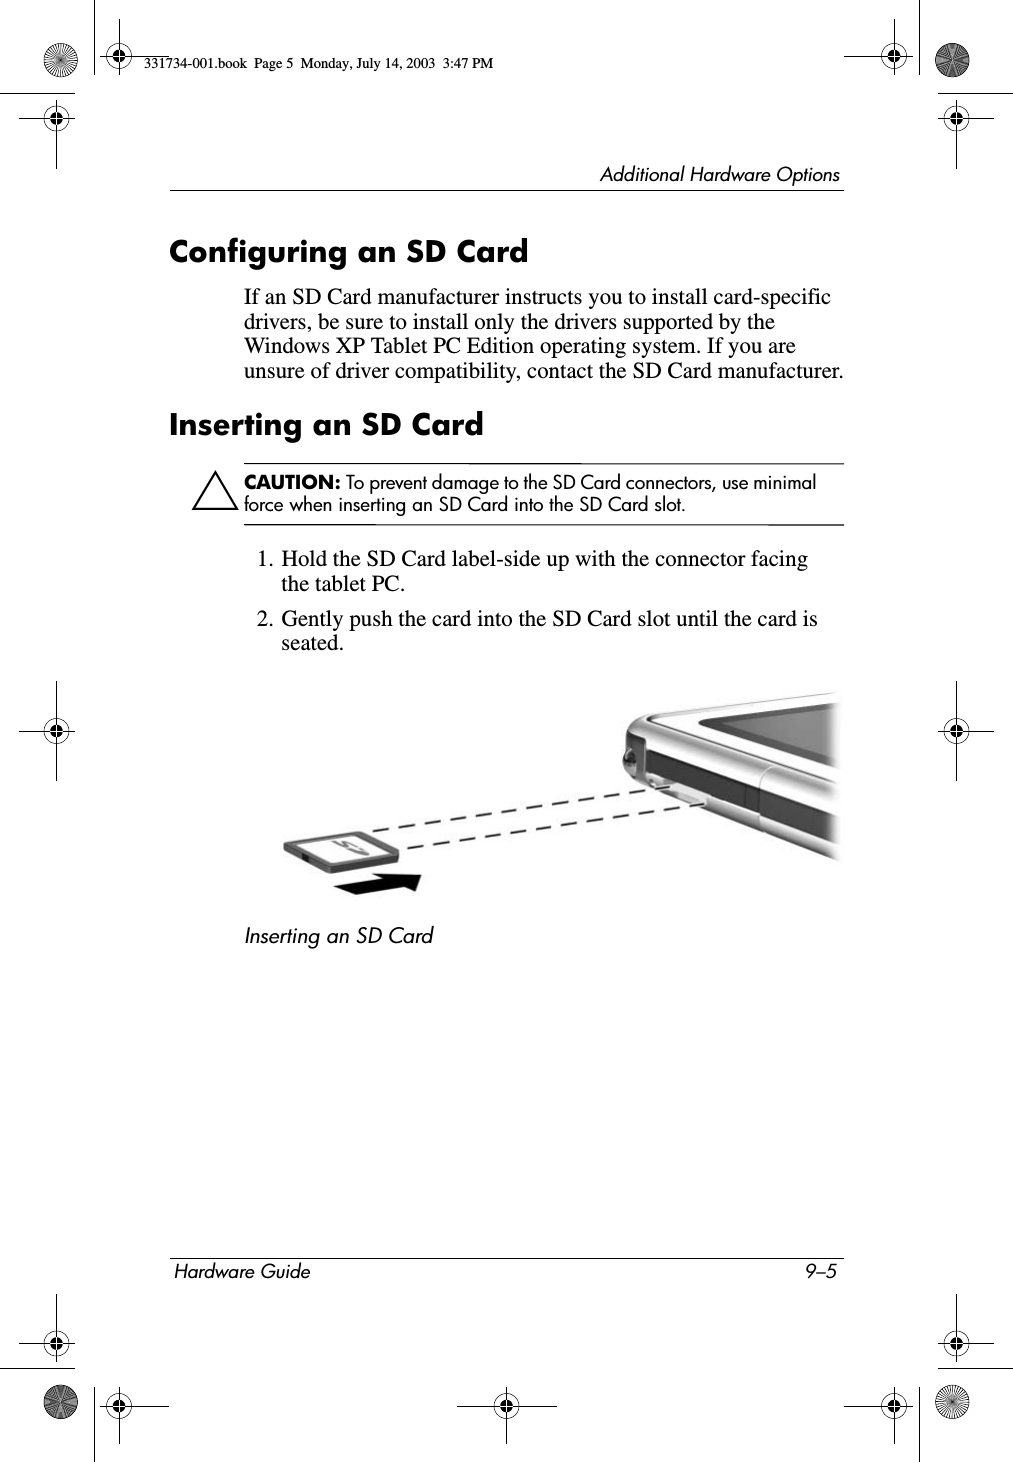 Additional Hardware OptionsHardware Guide 9–5Configuring an SD CardIf an SD Card manufacturer instructs you to install card-specific drivers, be sure to install only the drivers supported by the Windows XP Tablet PC Edition operating system. If you are unsure of driver compatibility, contact the SD Card manufacturer.Inserting an SD CardÄCAUTION: To prevent damage to the SD Card connectors, use minimal force when inserting an SD Card into the SD Card slot.1. Hold the SD Card label-side up with the connector facing the tablet PC.2. Gently push the card into the SD Card slot until the card is seated.Inserting an SD Card331734-001.book  Page 5  Monday, July 14, 2003  3:47 PM